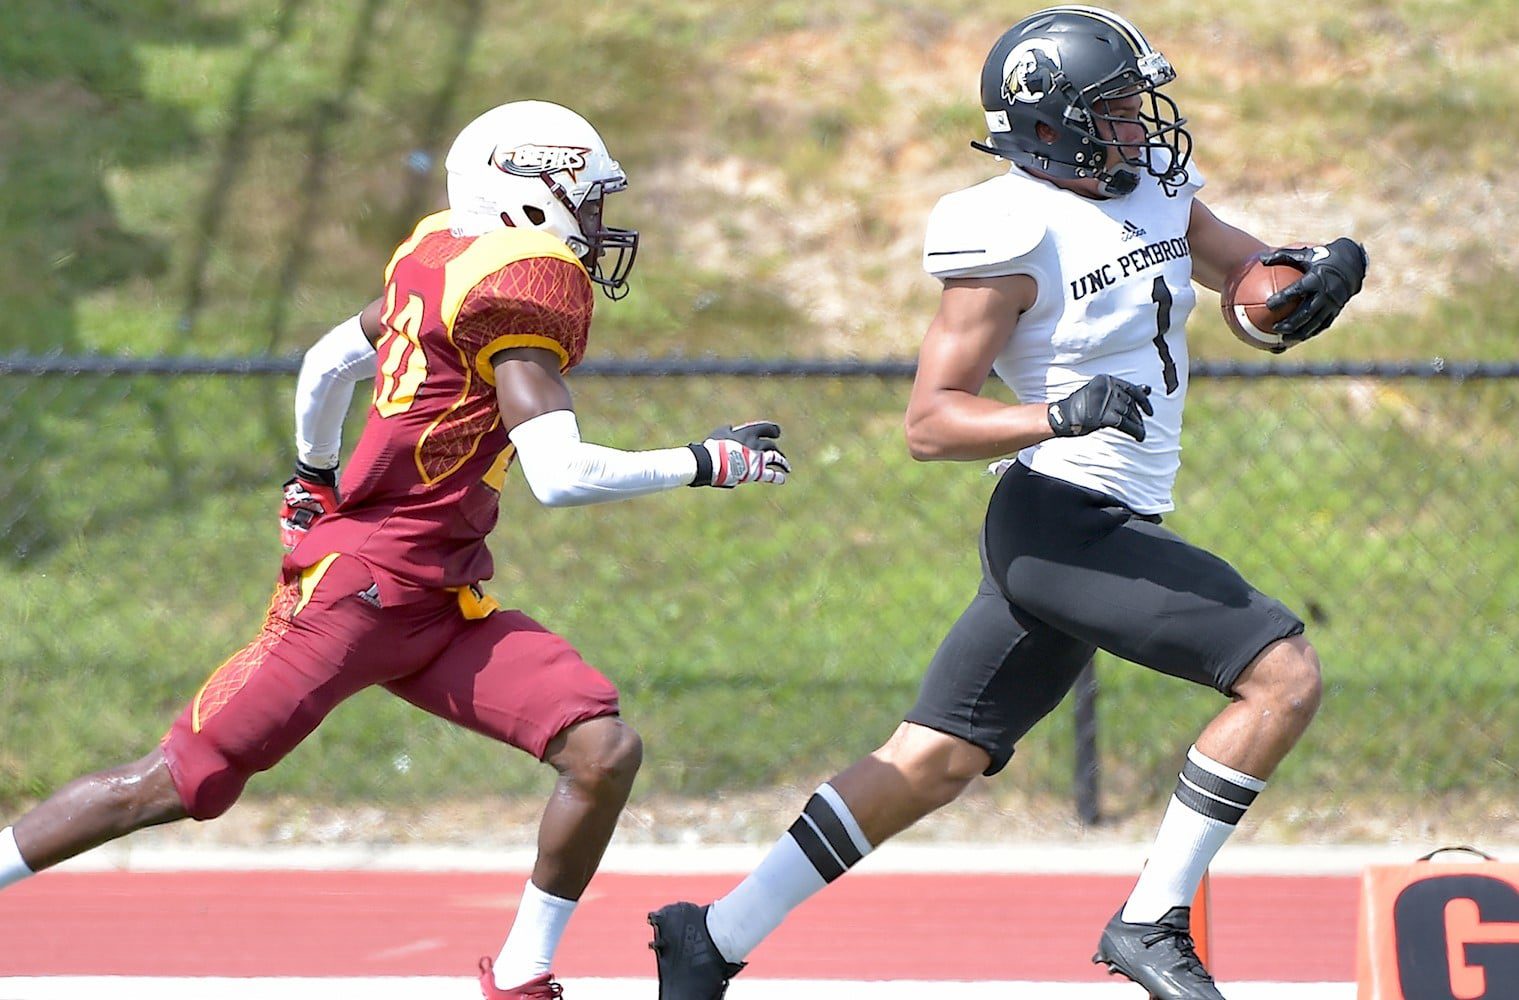 UNC Pembroke look to slay another giant in D2 football playoffs – The